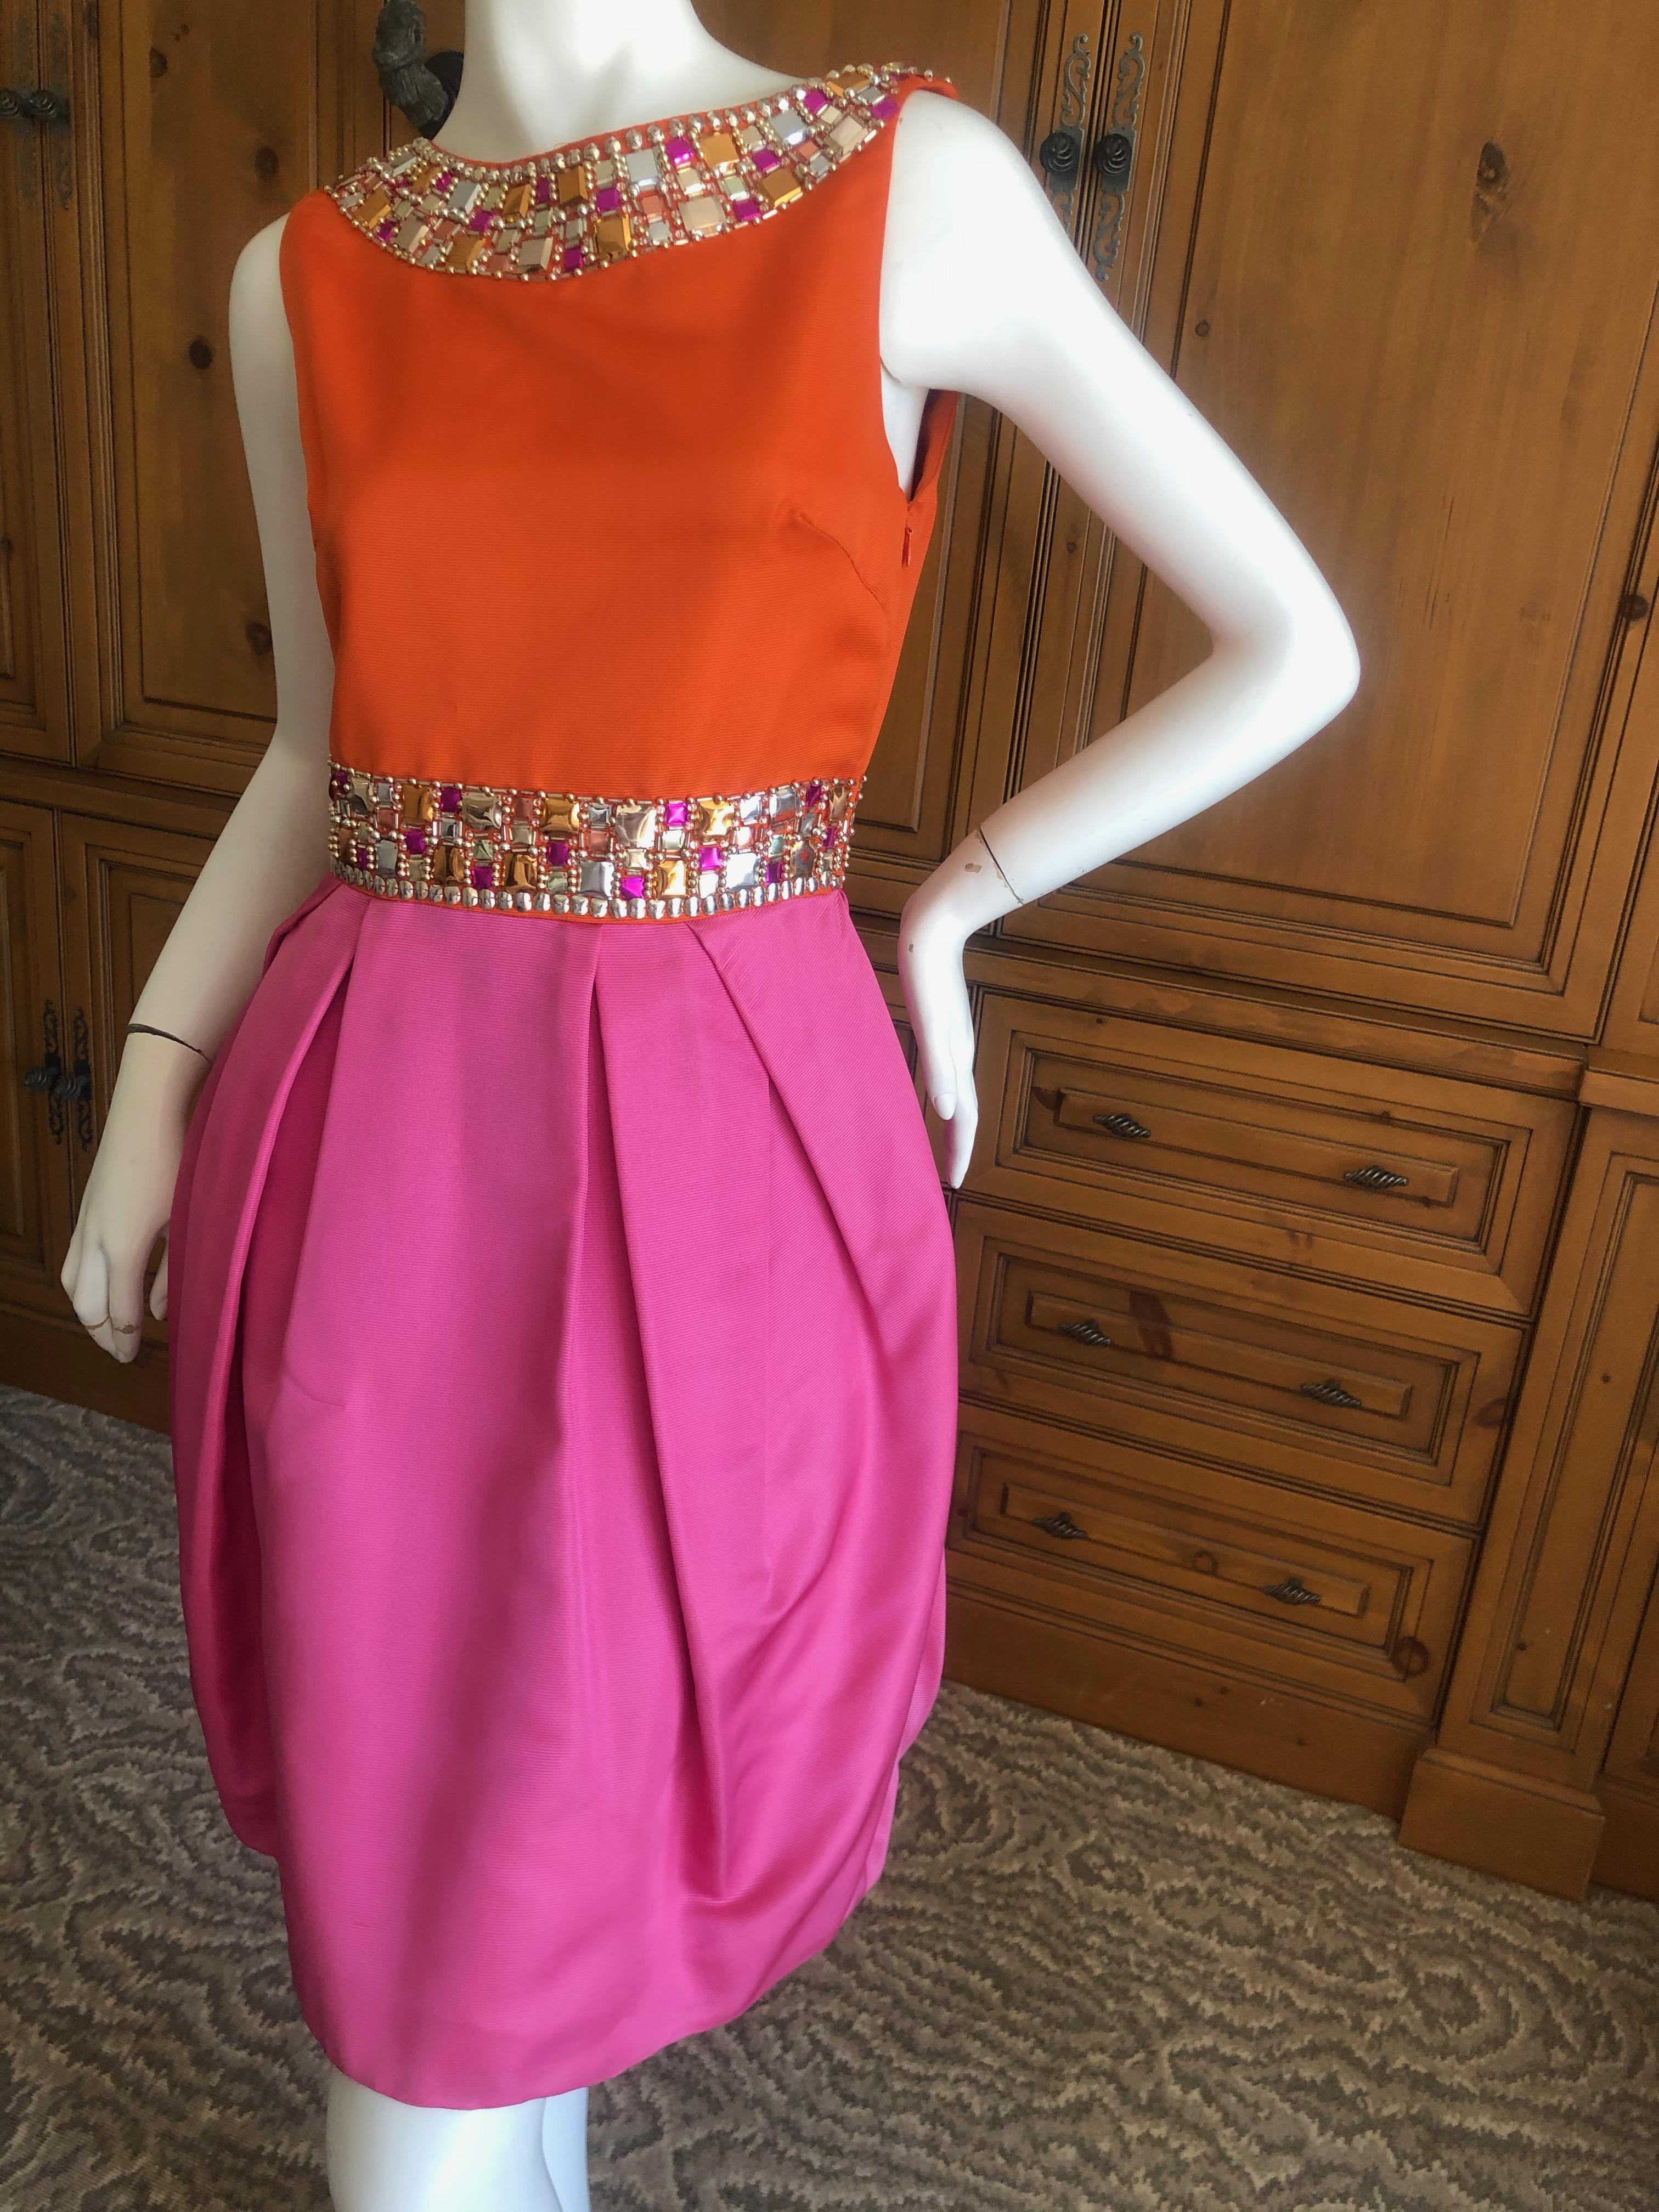  Dior by John Galliano Orange and Pink Silk Sixties Style Embellished Dress 1